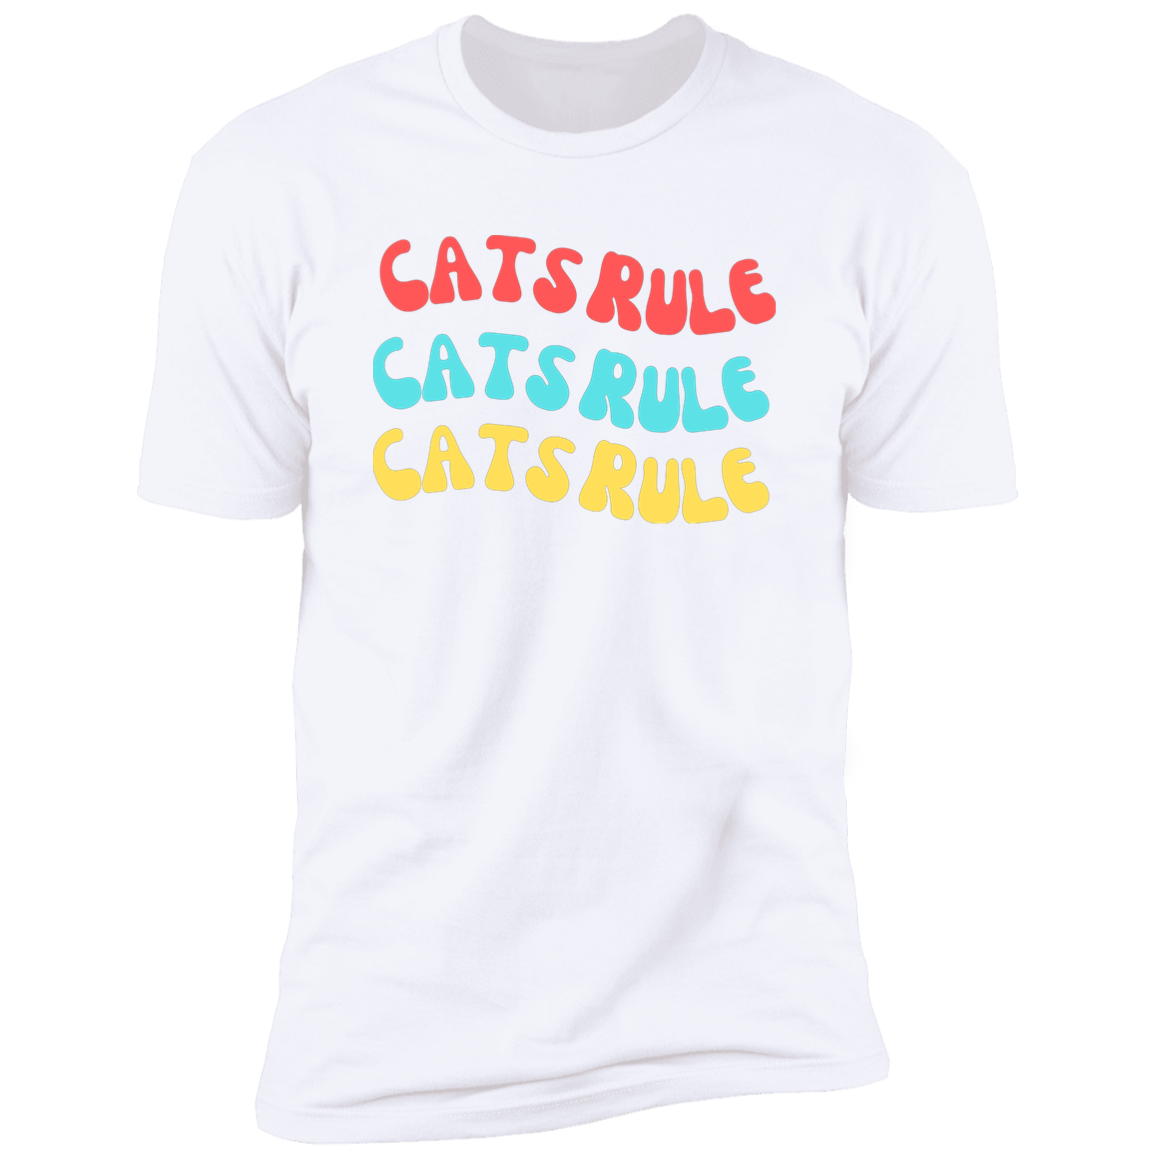 Cats Rule T-shirt, Cat Shirt for humans, in white